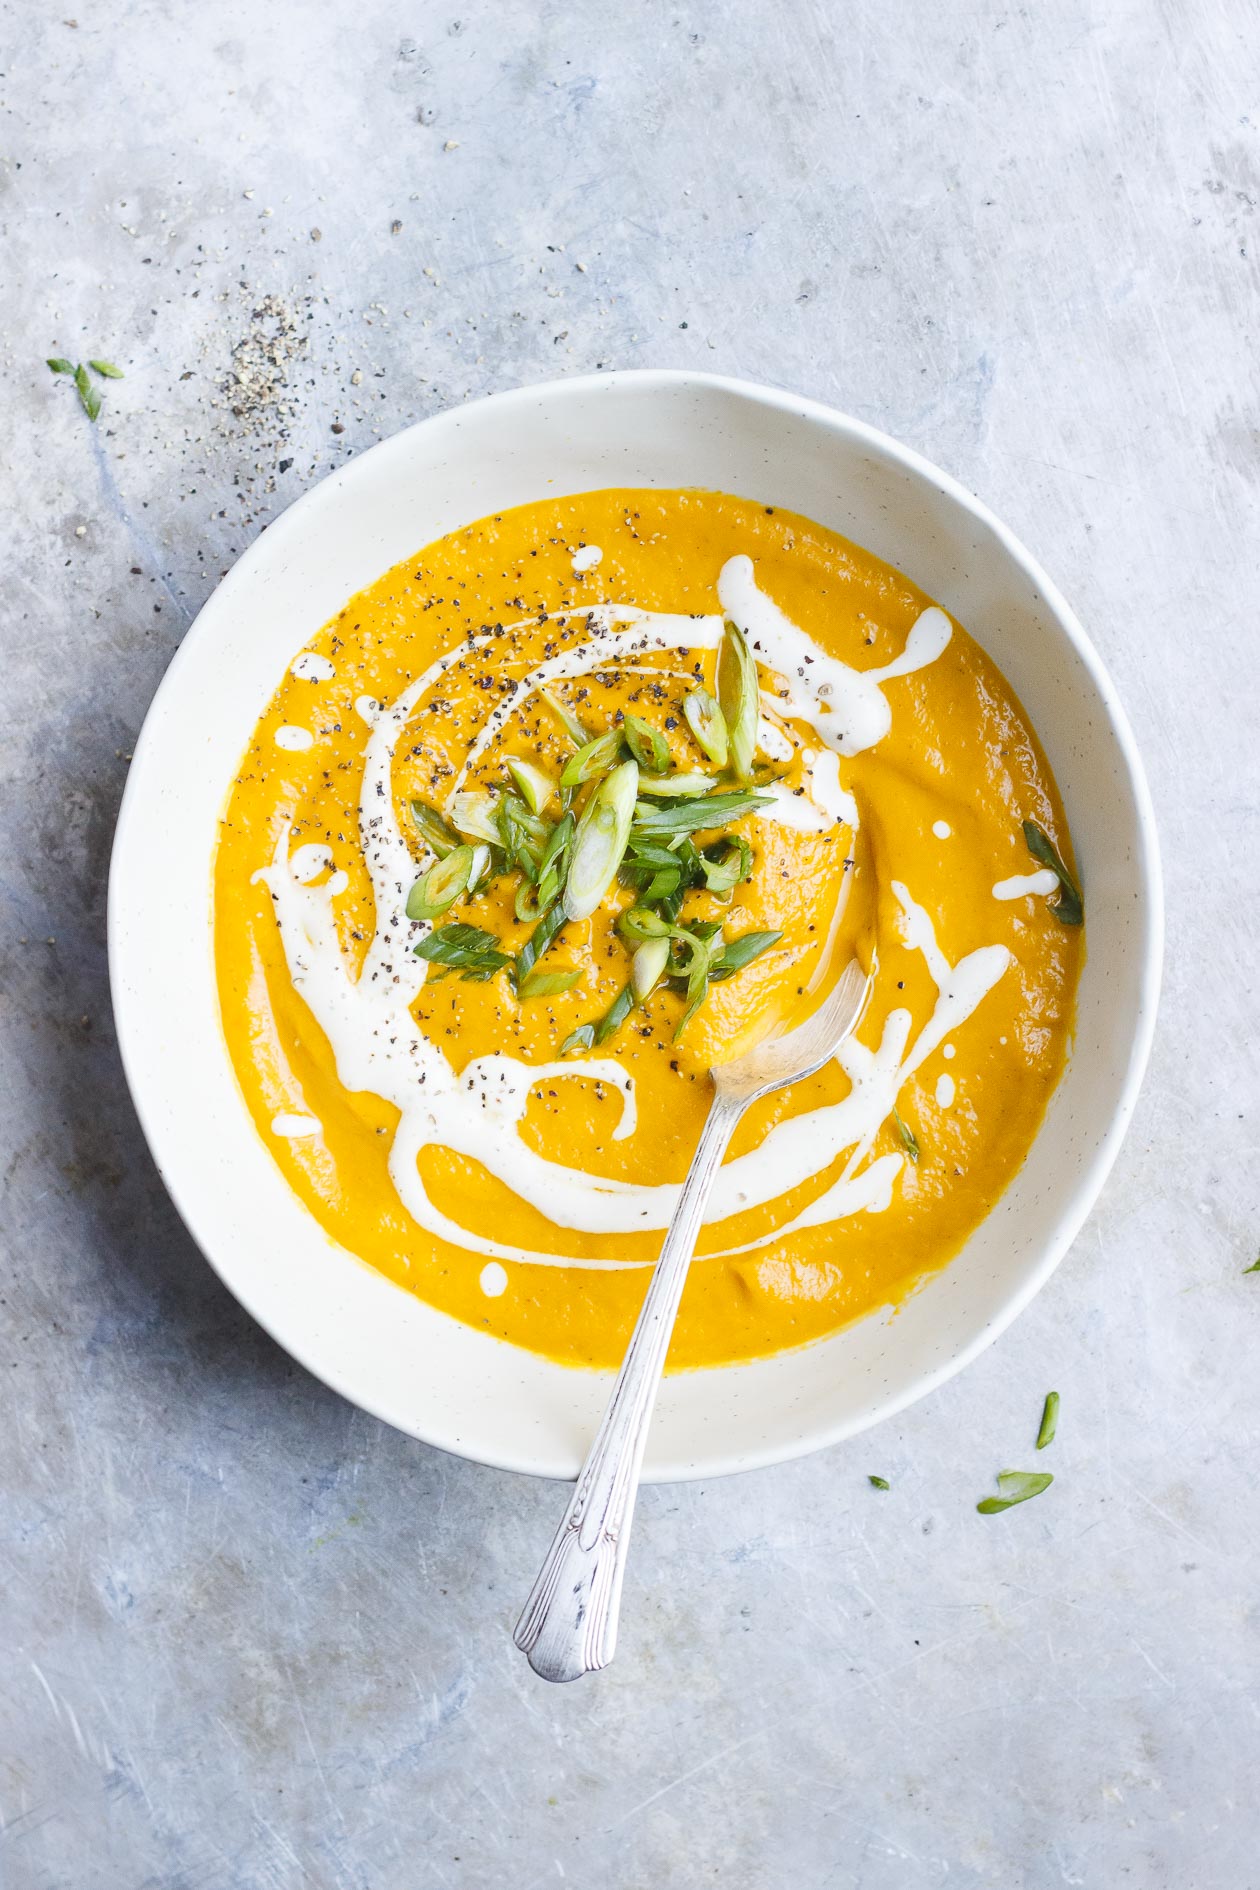 Caramelized Golden Beet Soup with Fall Roots + Garlicky Yogurt | Roasted and deeply caramelized golden beet soup with fall root vegetables and garlicky yogurt or cashew sauce to keep it vegan.